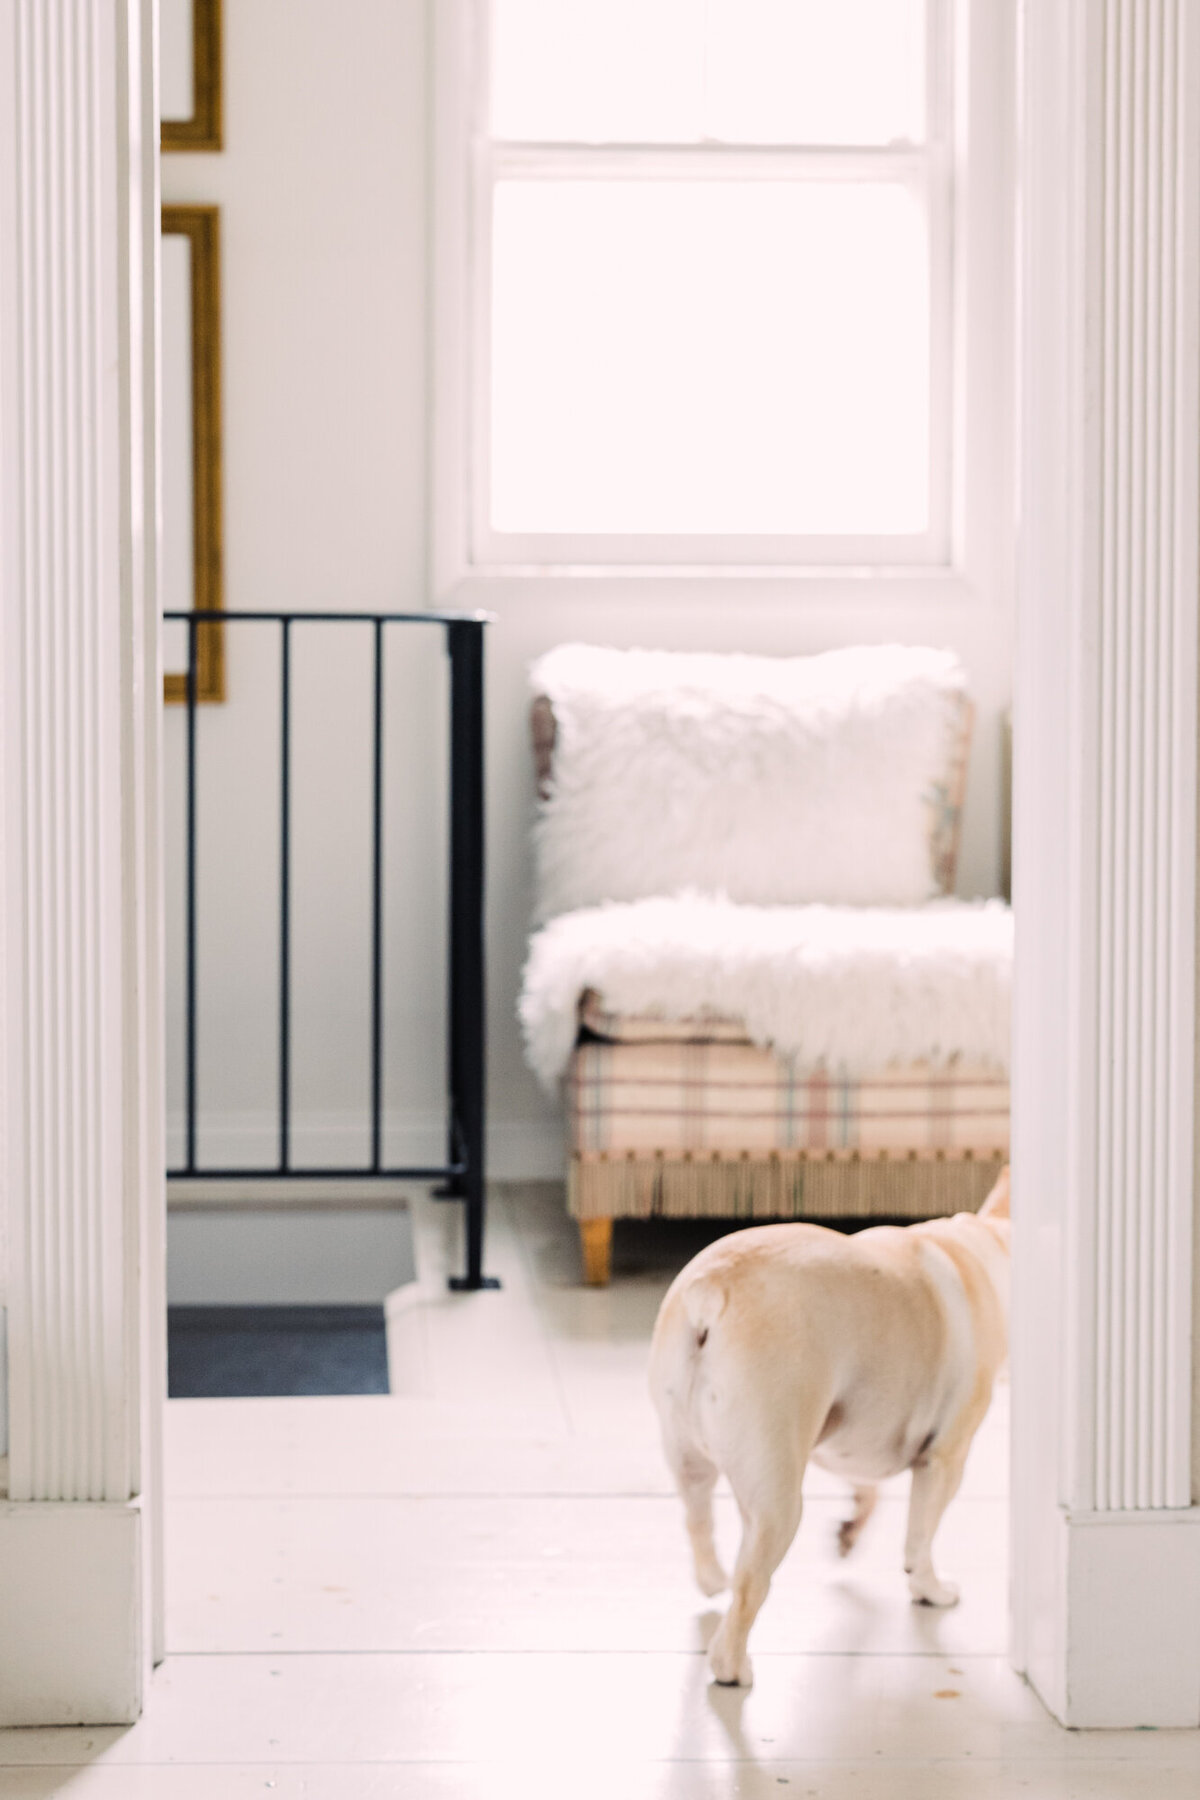 A French Bulldog walks away during an interior design photoshoot in Chicago